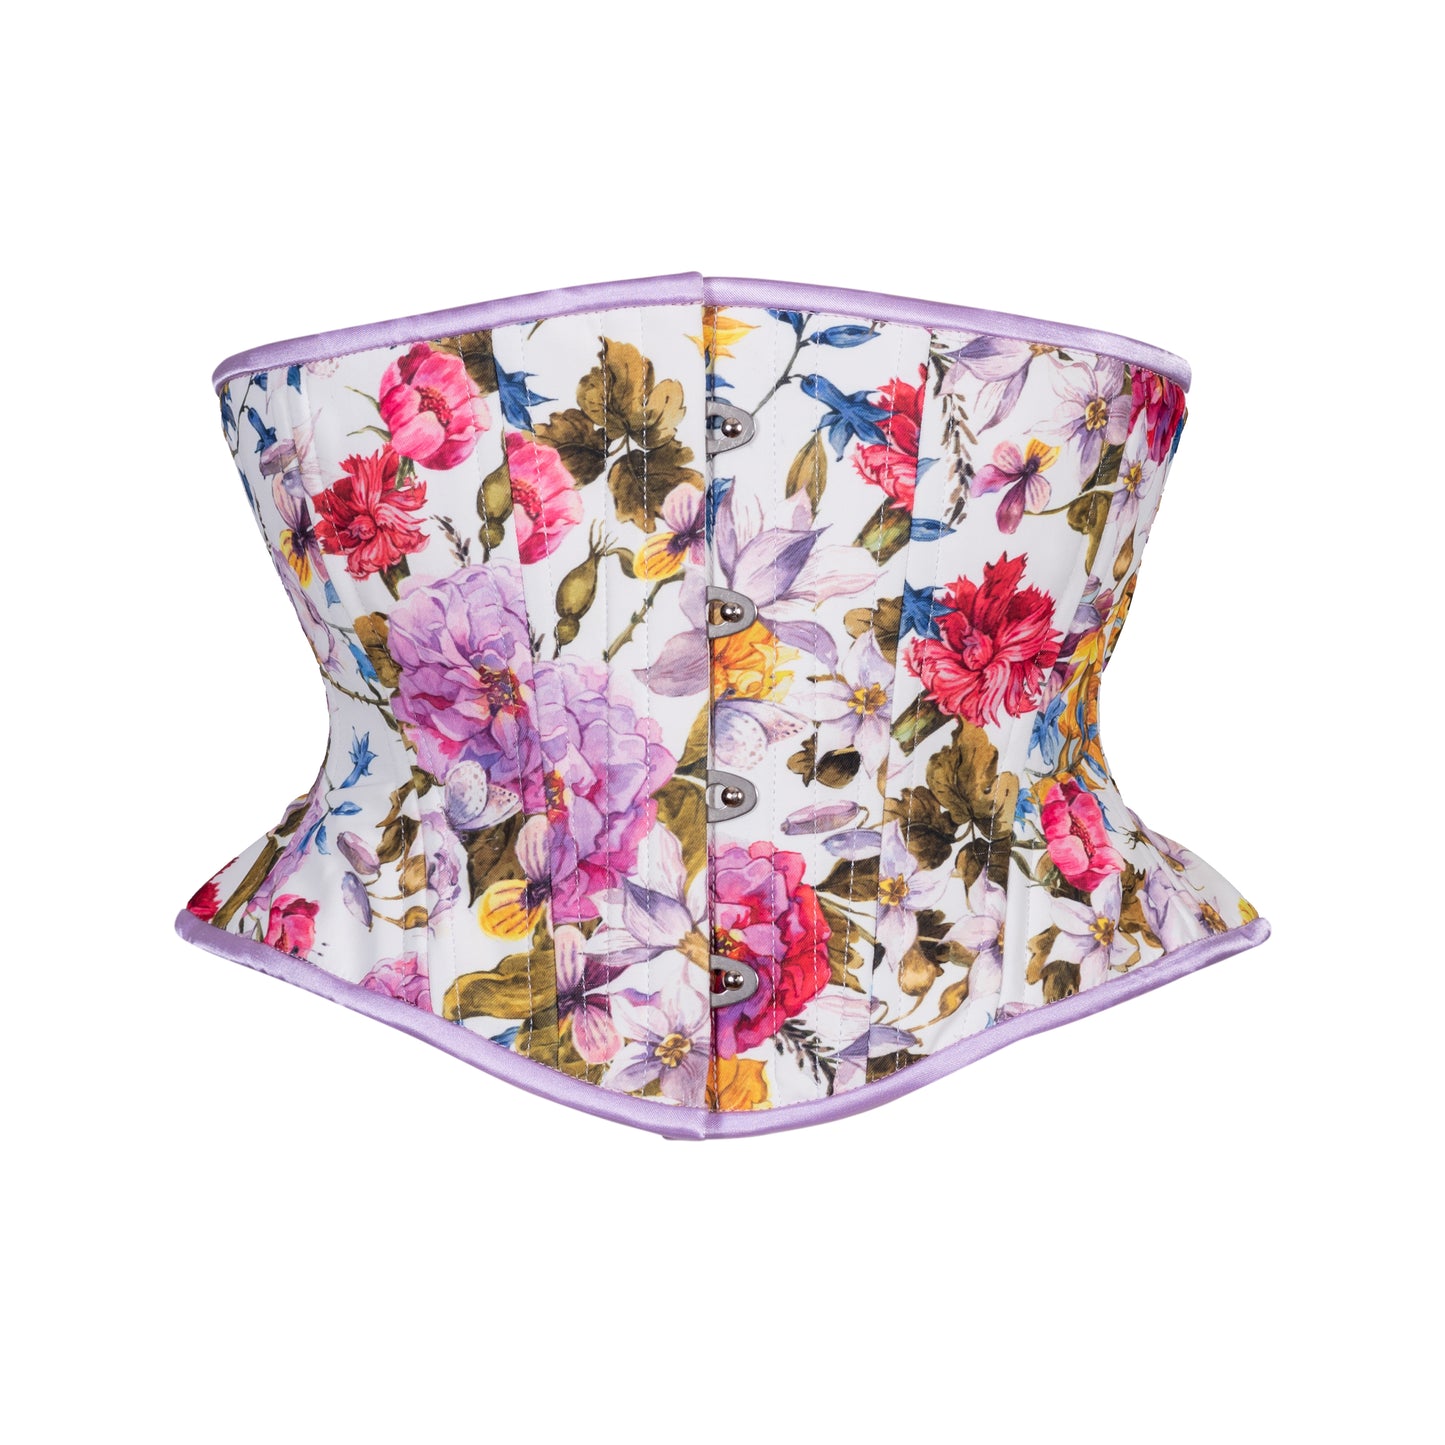 Flowers in Summer Corset, Hourglass Silhouette, Short